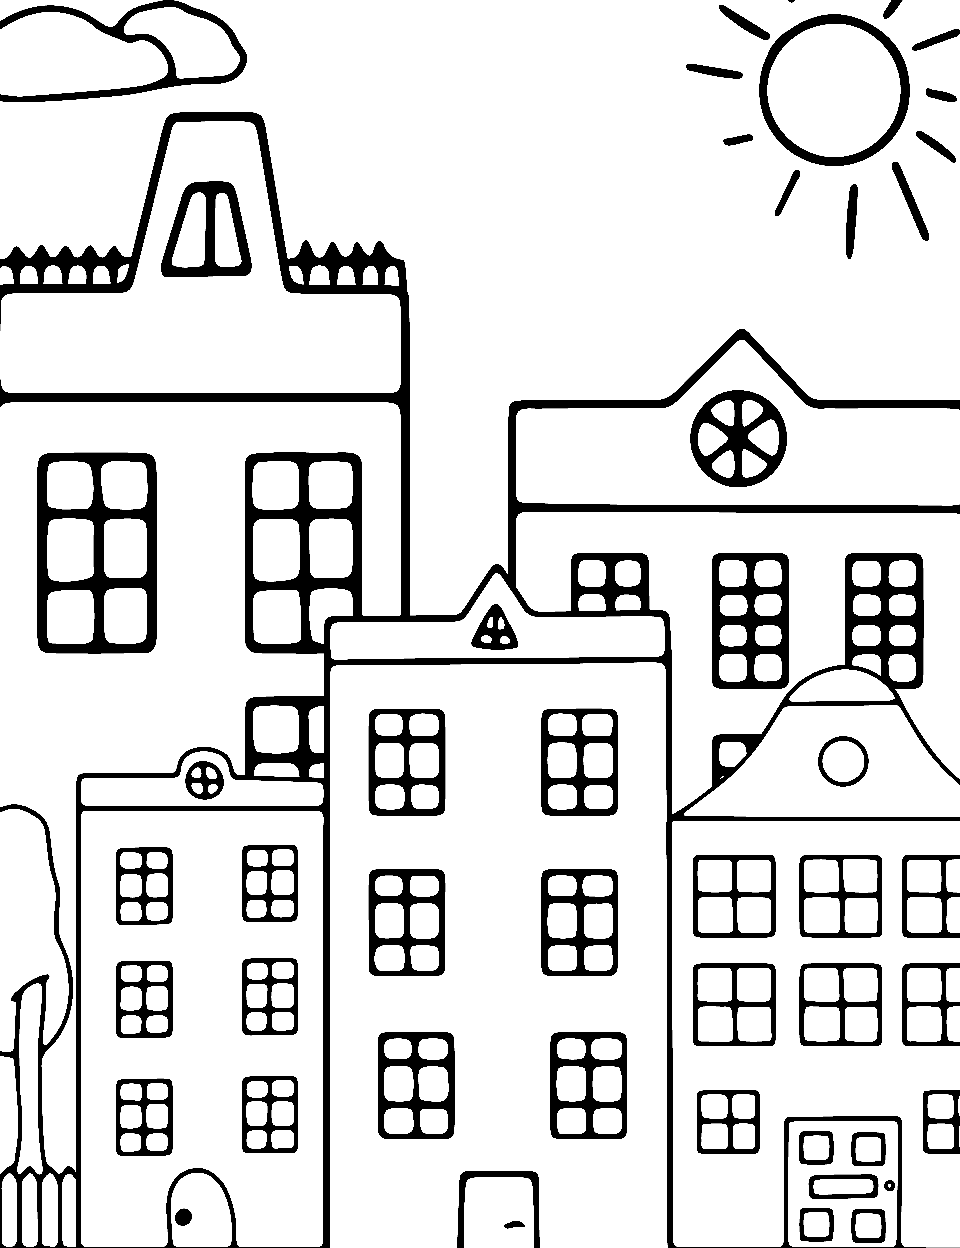 Busy Urban Apartment Coloring Page - A big, detailed apartment building in an urban city setting.